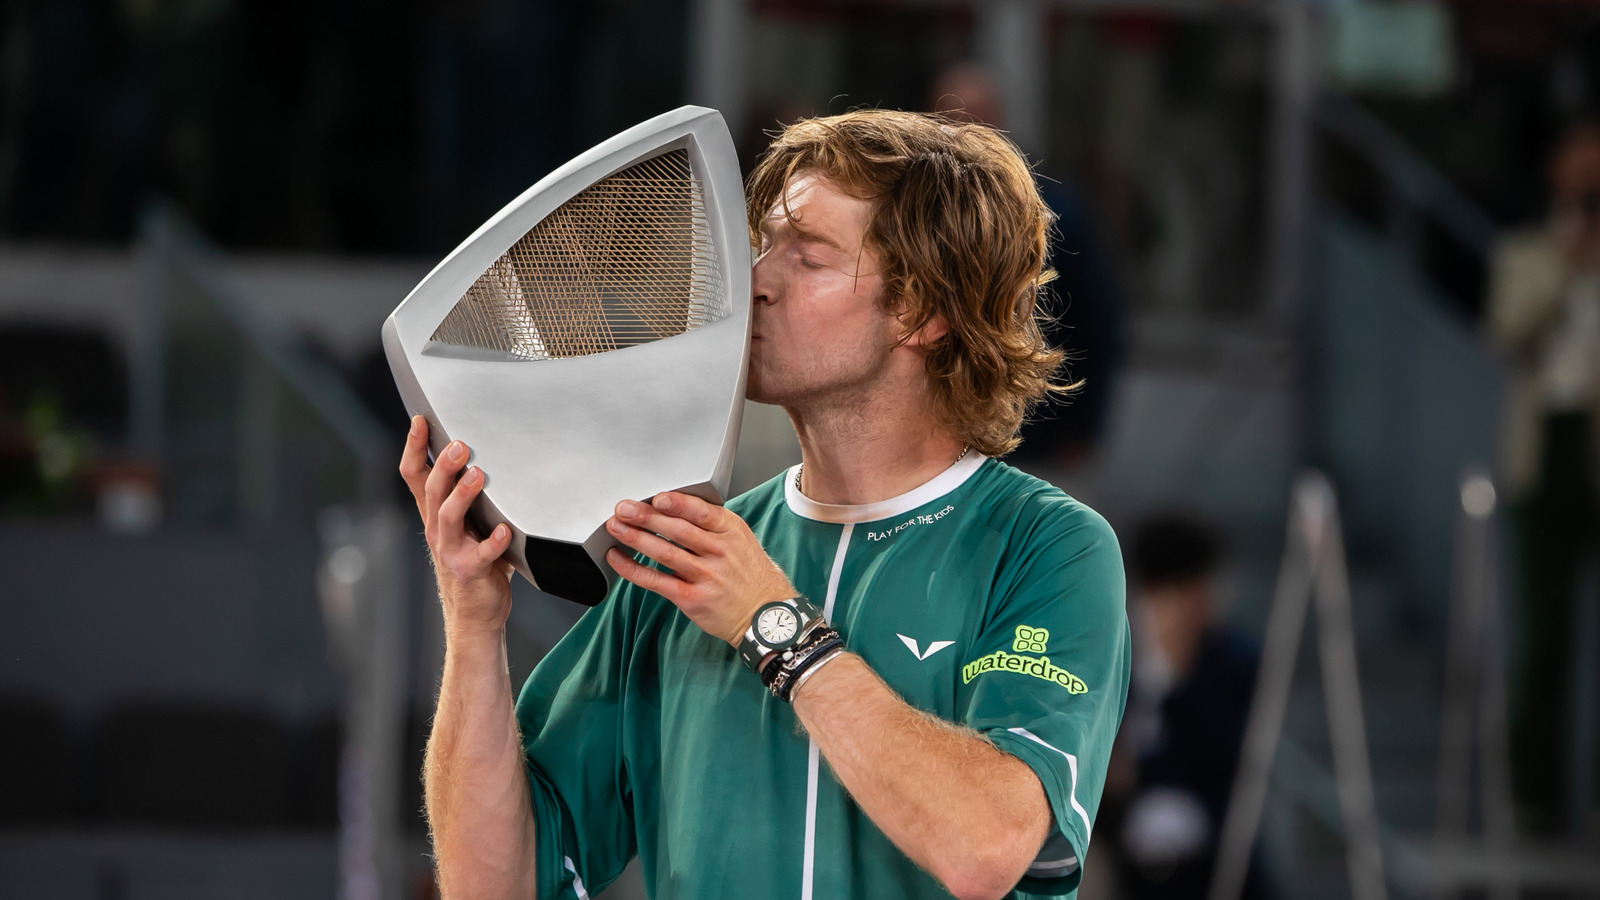 Here's why Andrey Rublev 'played for the kids' in Madrid despite feeling 'dead every day'